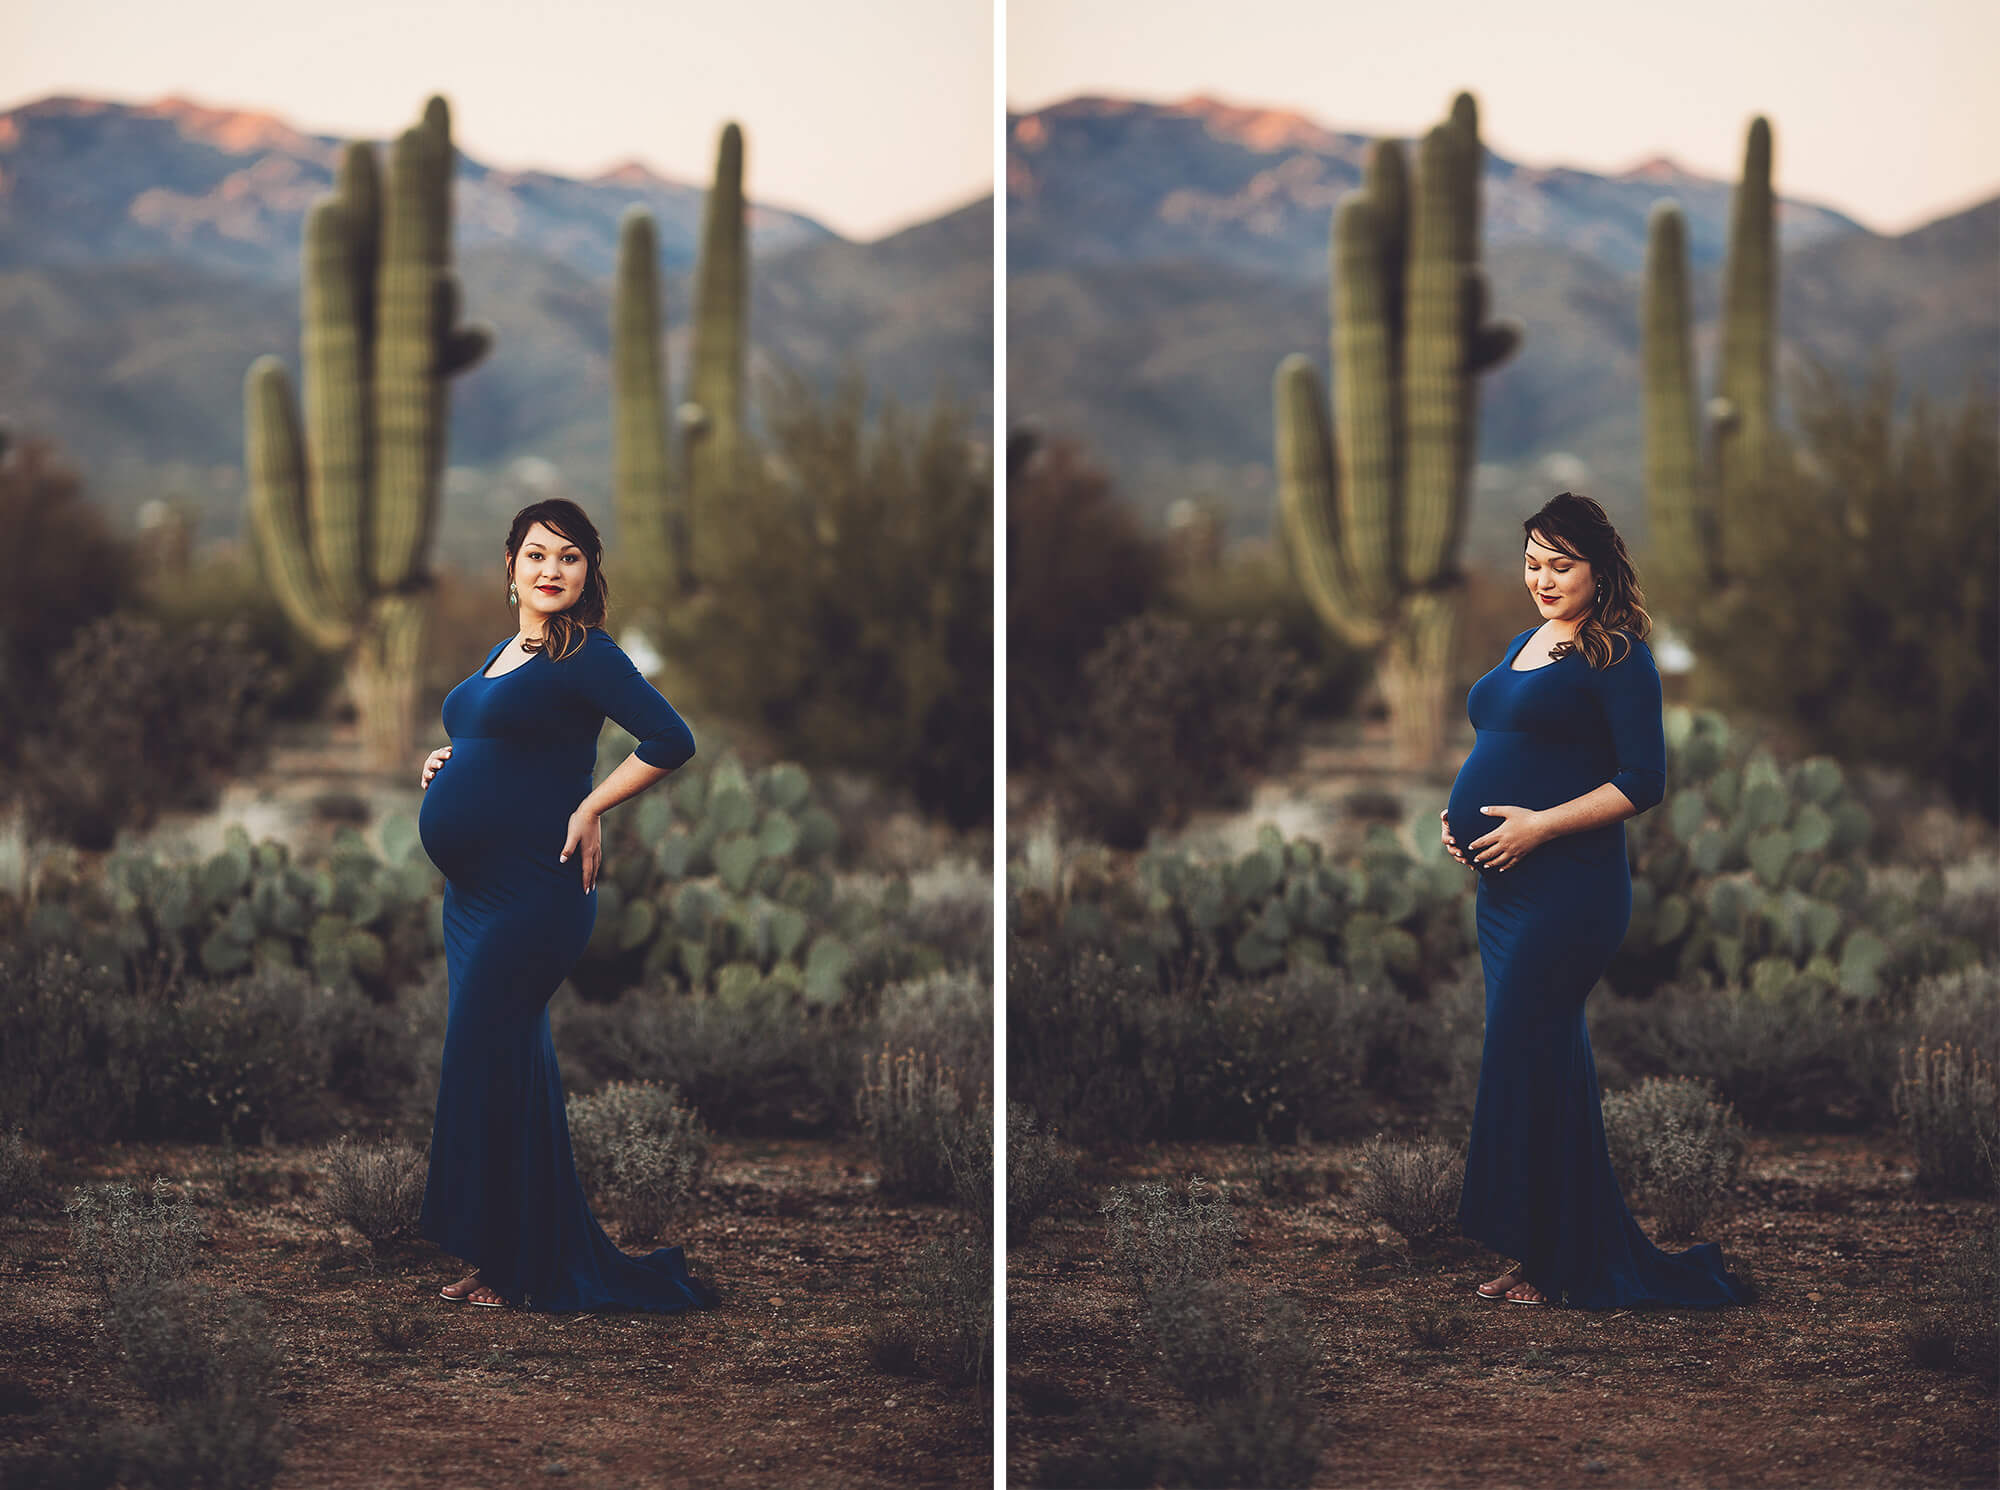 Alicia looking breathtaking with the mountains and giant saguaros behind her.